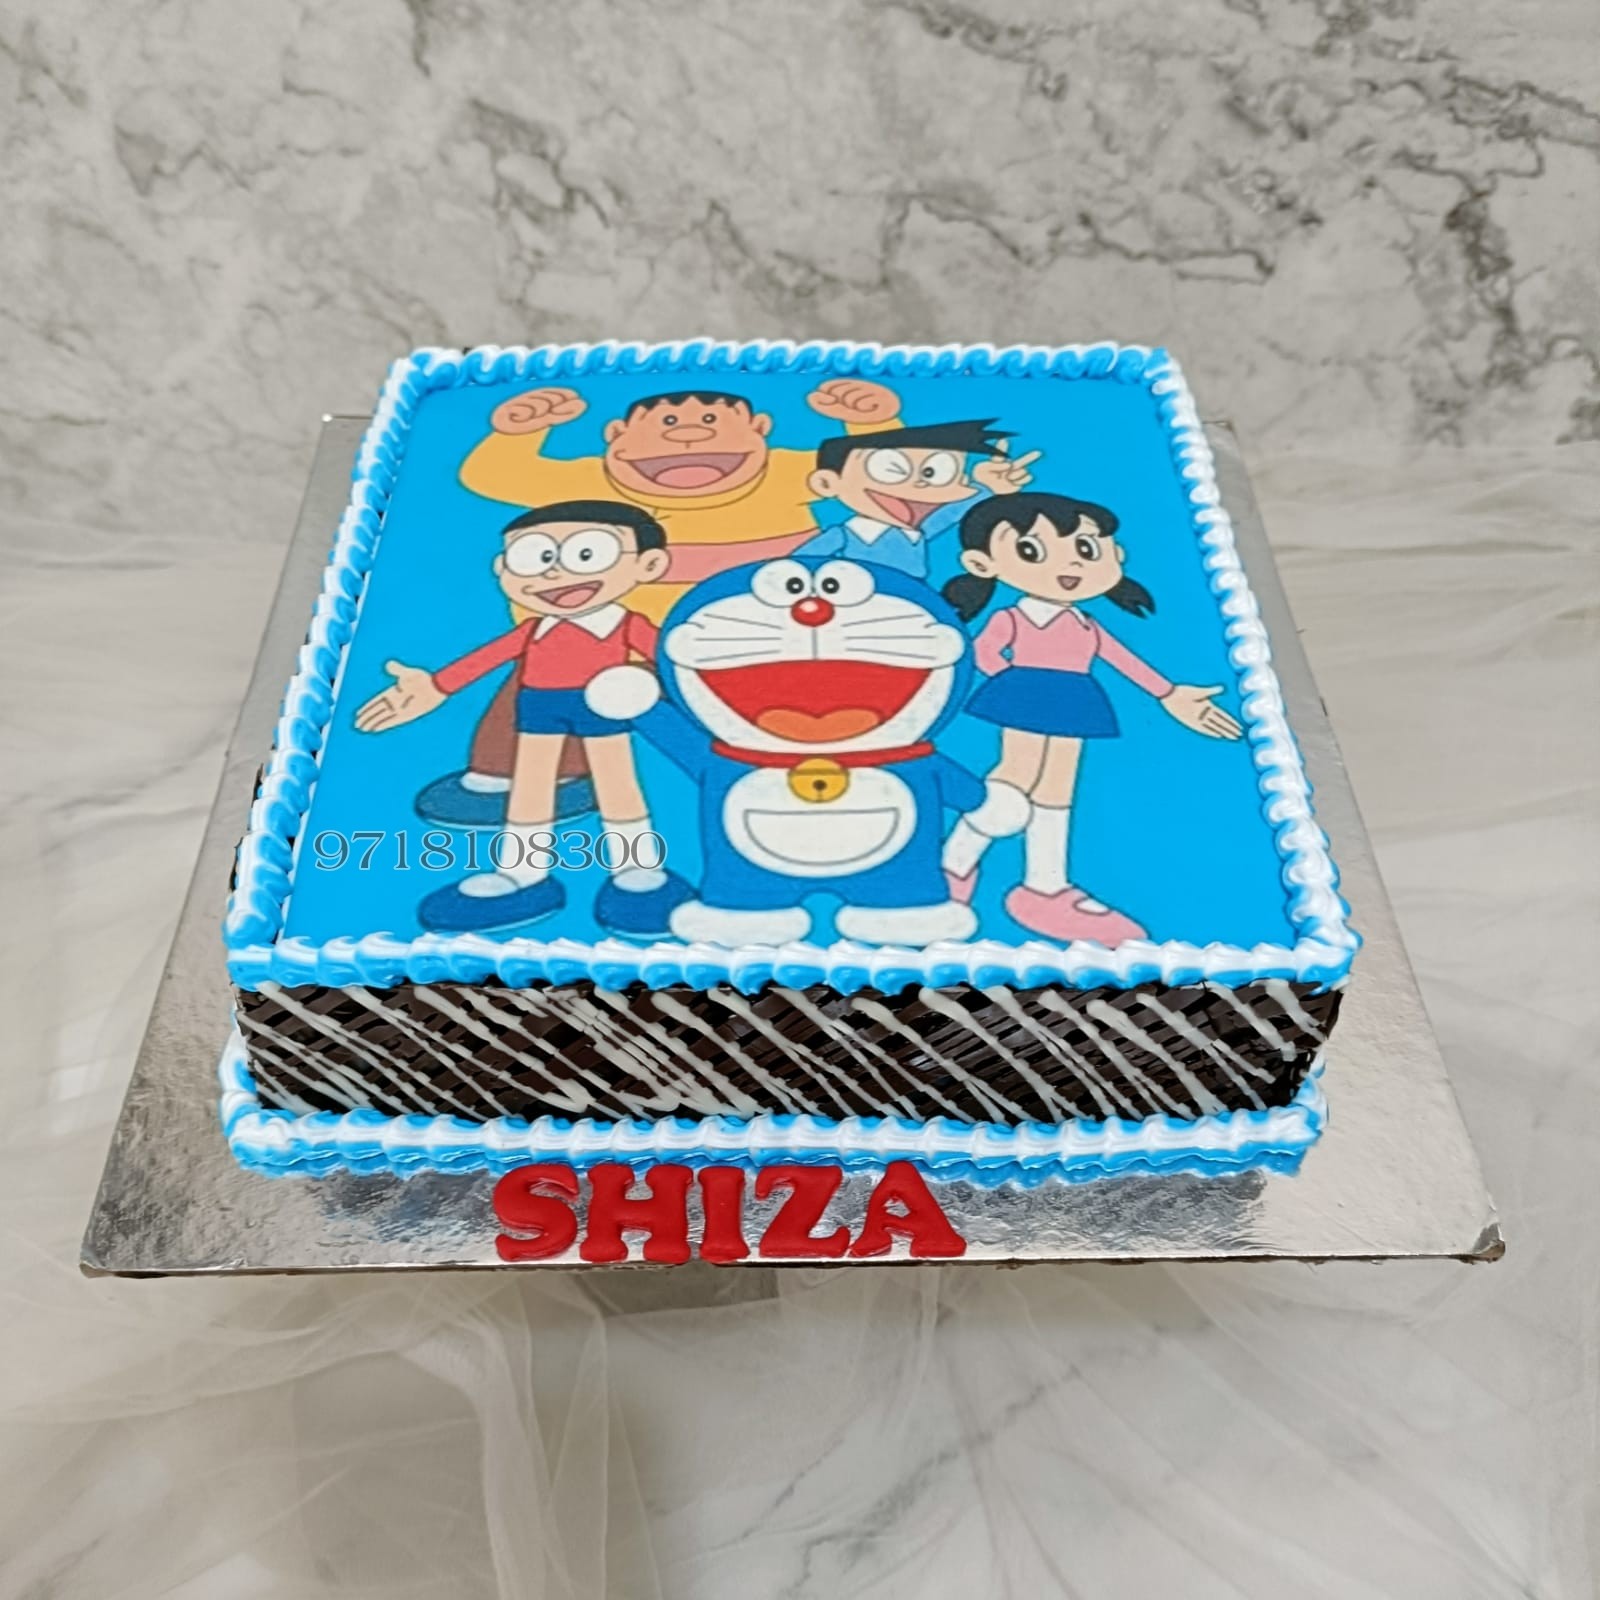 Doraemon chocolate cake - Send gifts to Hyderabad From USA|Gifts to  Hyderabad India same day delivery |online birthday gifts delivery in  Hyderabad